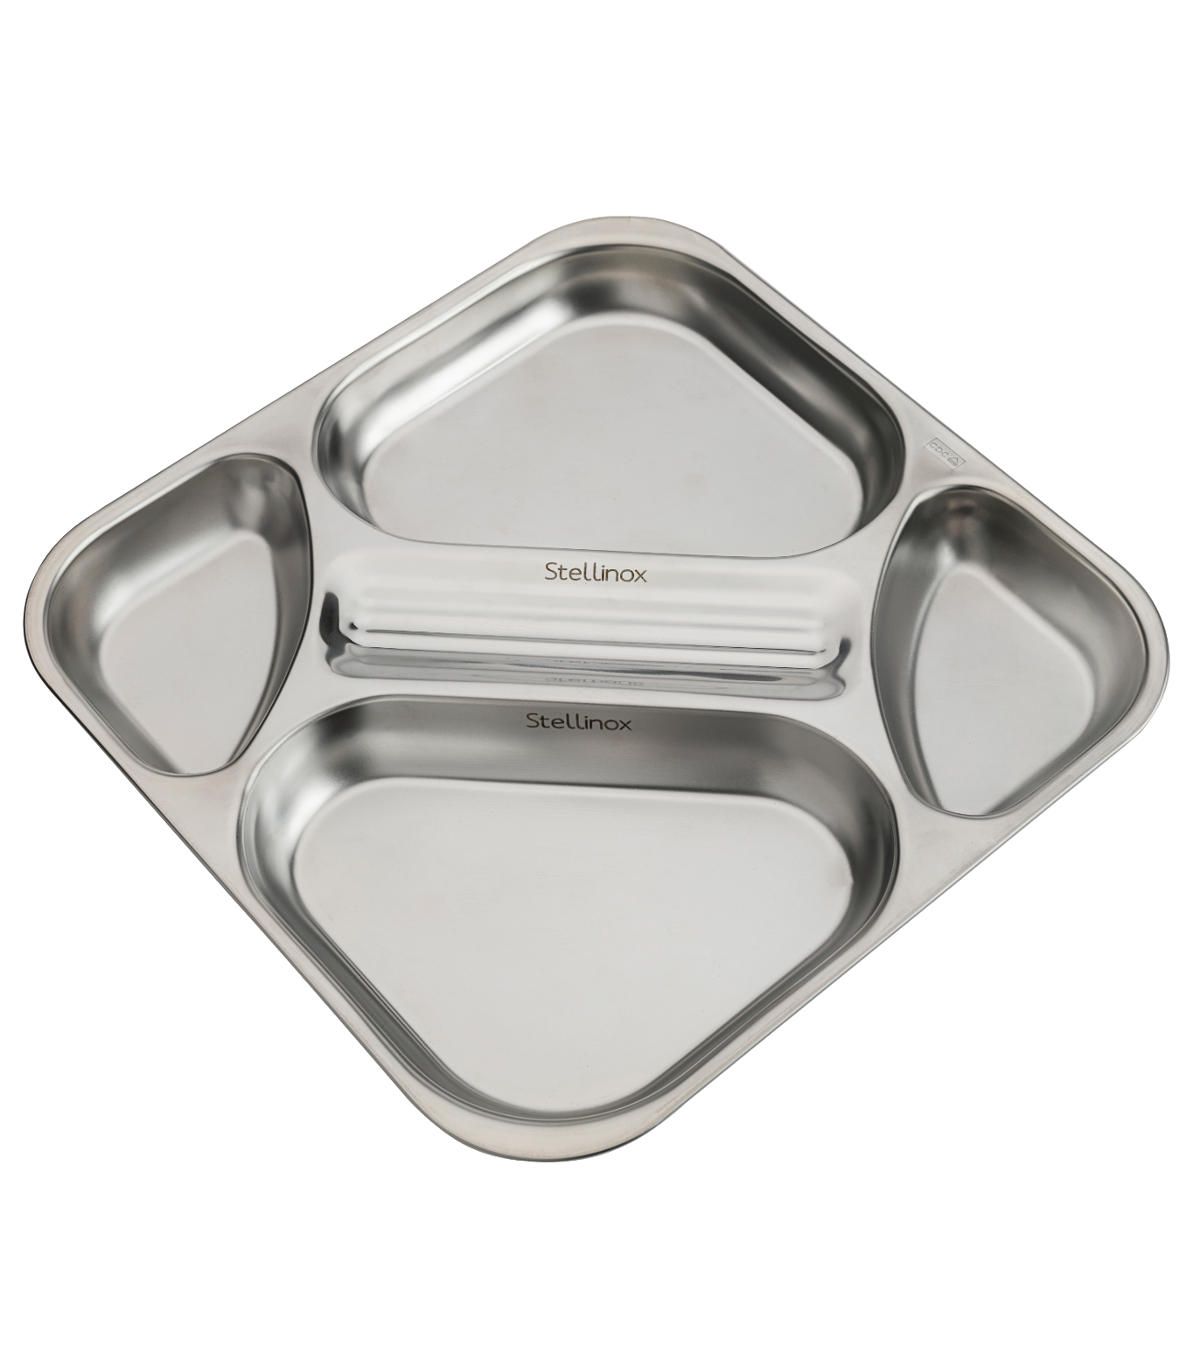 Self-service tray 4 compartments 33.5 x 33.5 cm, stainless steel 18/10